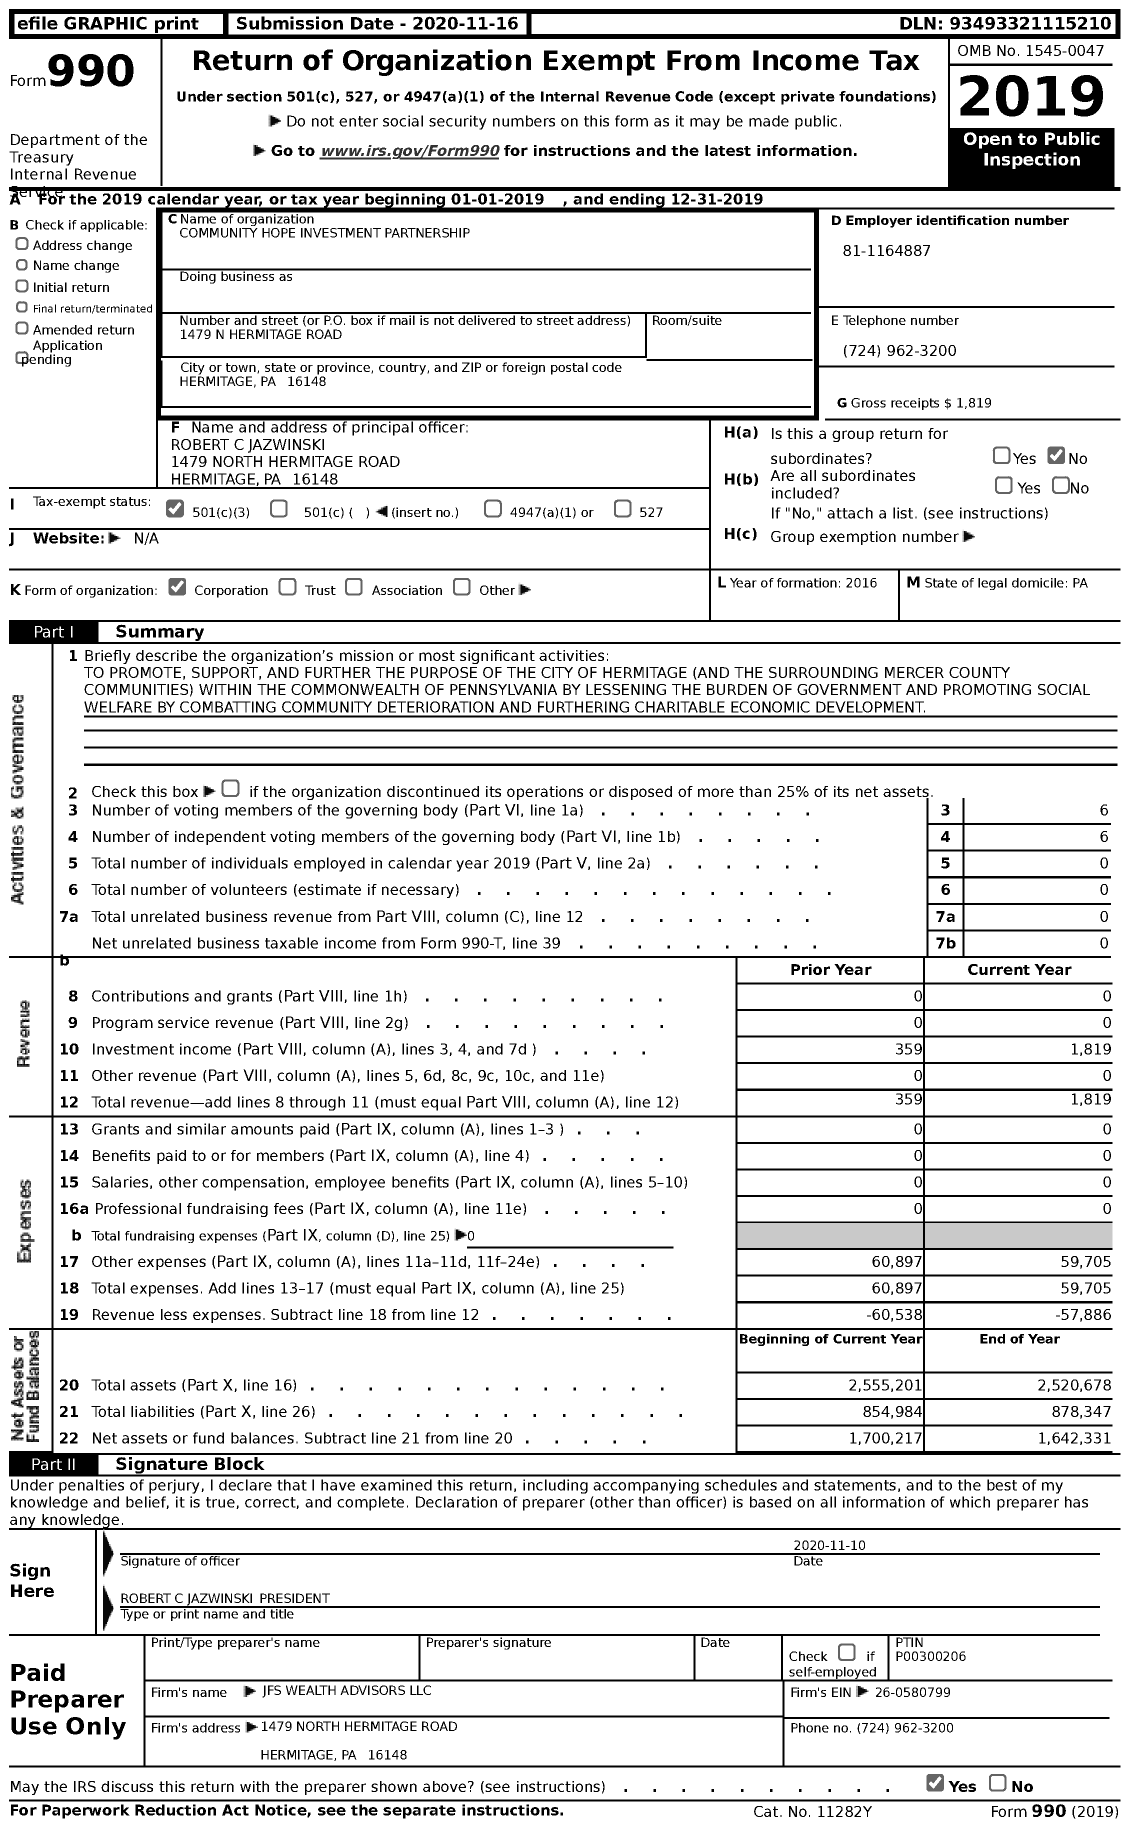 Image of first page of 2019 Form 990 for Community Hope Investment Partnership